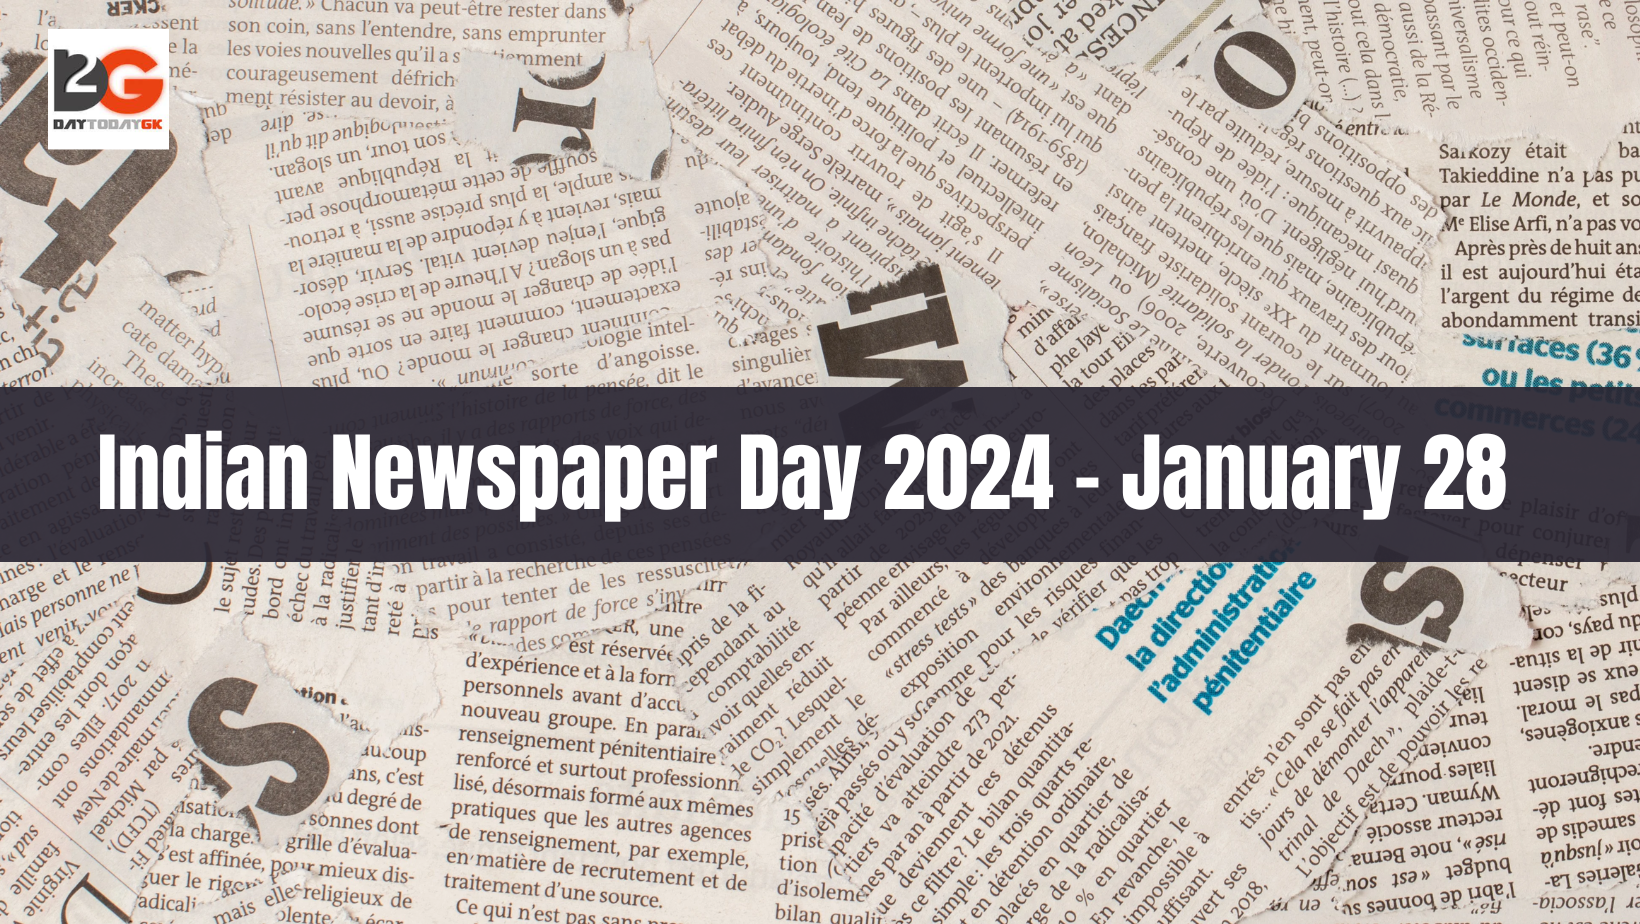 Indian Newspaper Day 2024 is observed on January 28